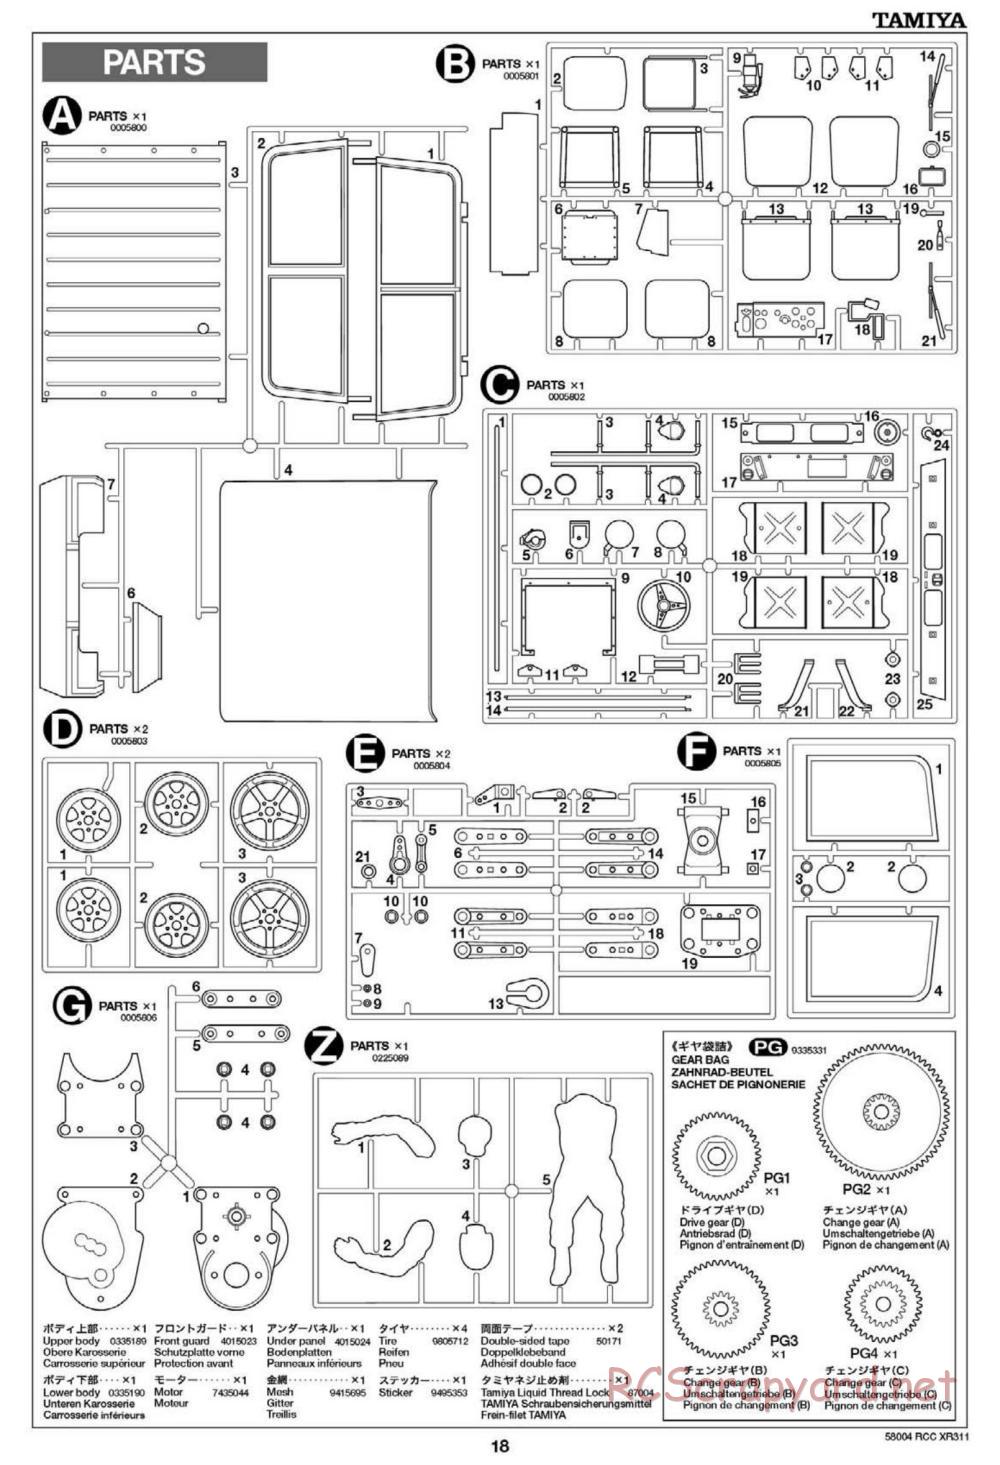 Tamiya - XR311 Combat Support Vehicle (2012) Chassis - Manual - Page 18